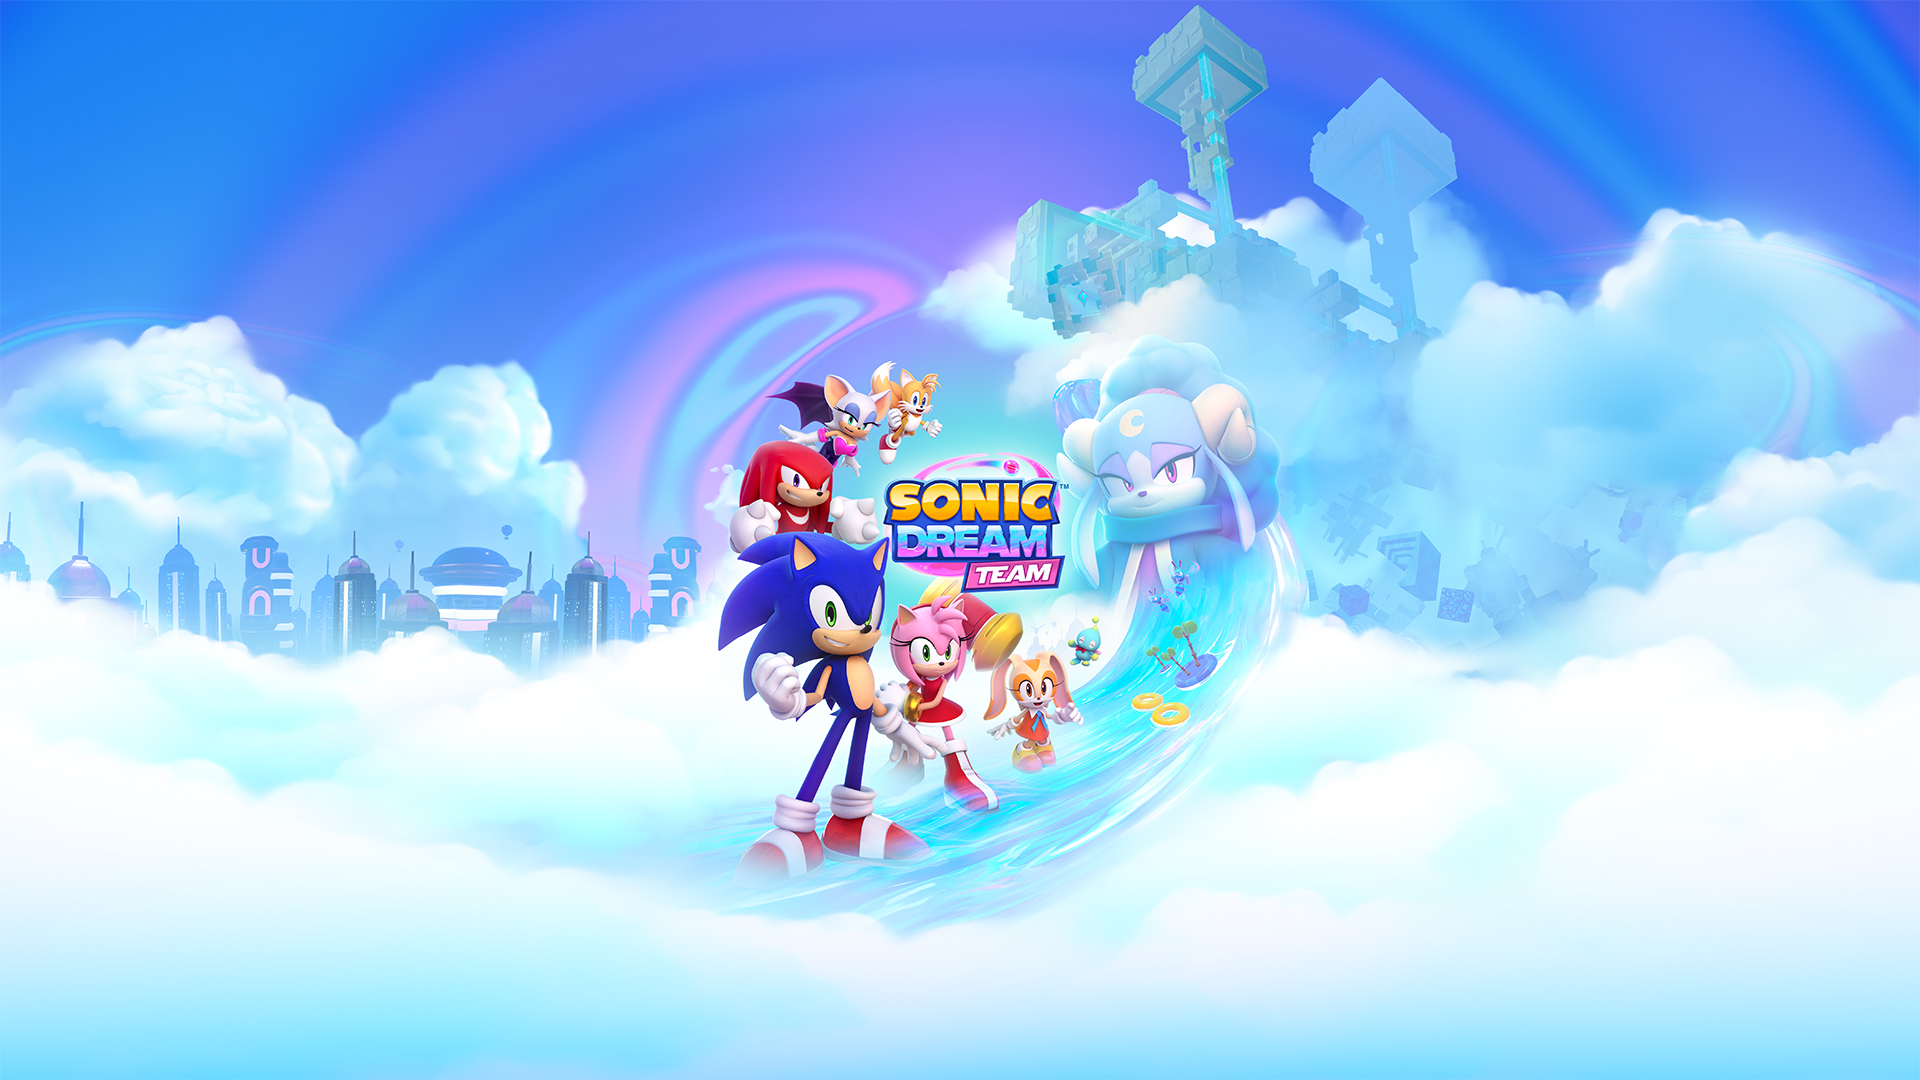 Sonic Tails Knuckles Amy Rose Sonic the Hedgehog Fan Art 